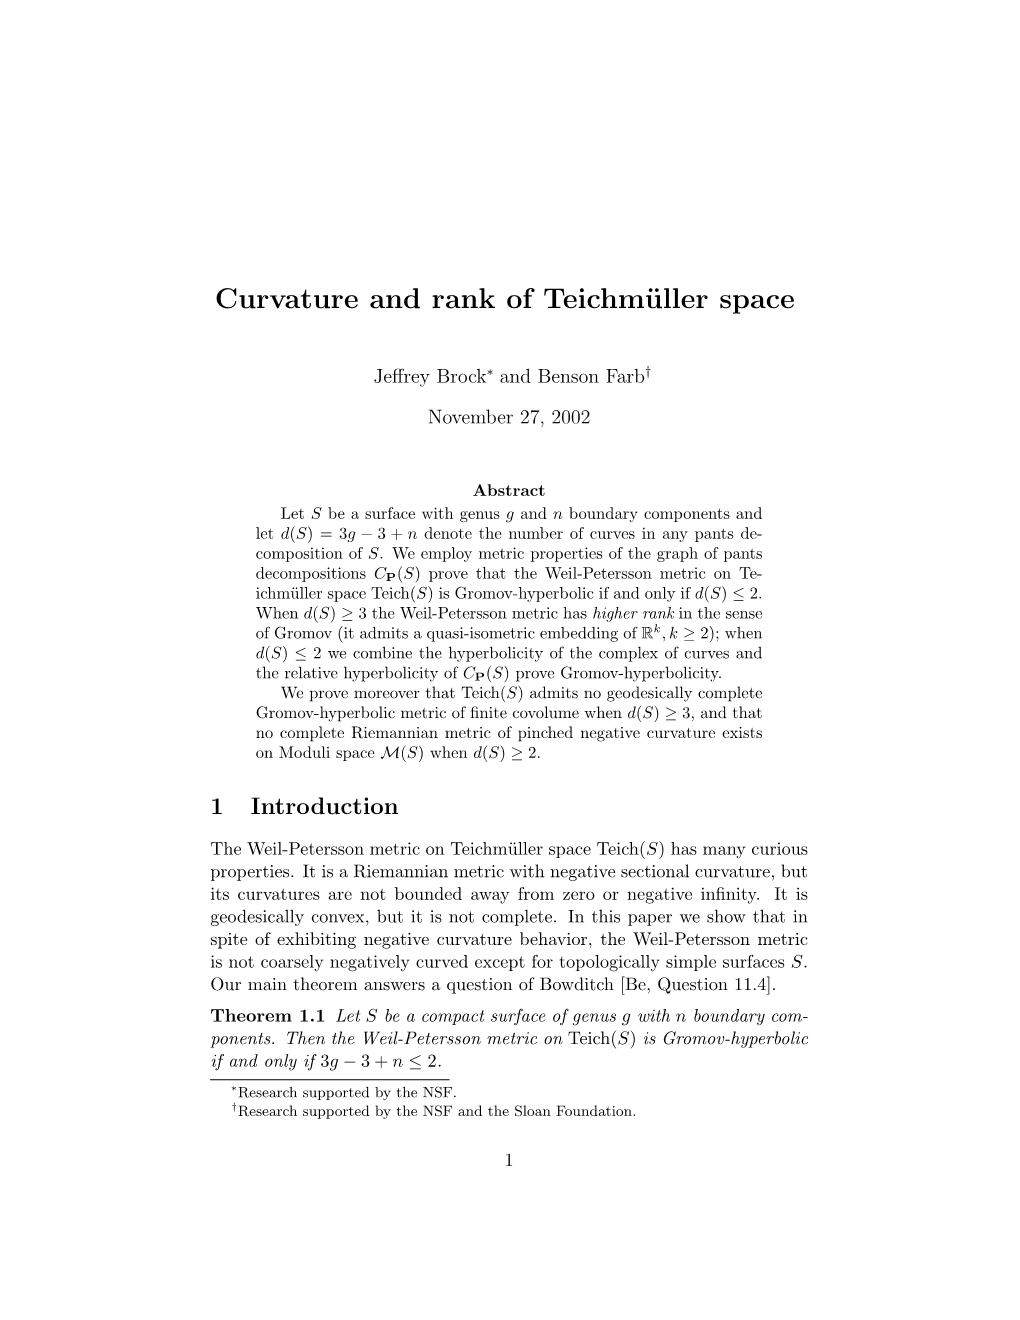 Curvature and Rank of Teichmüller Space